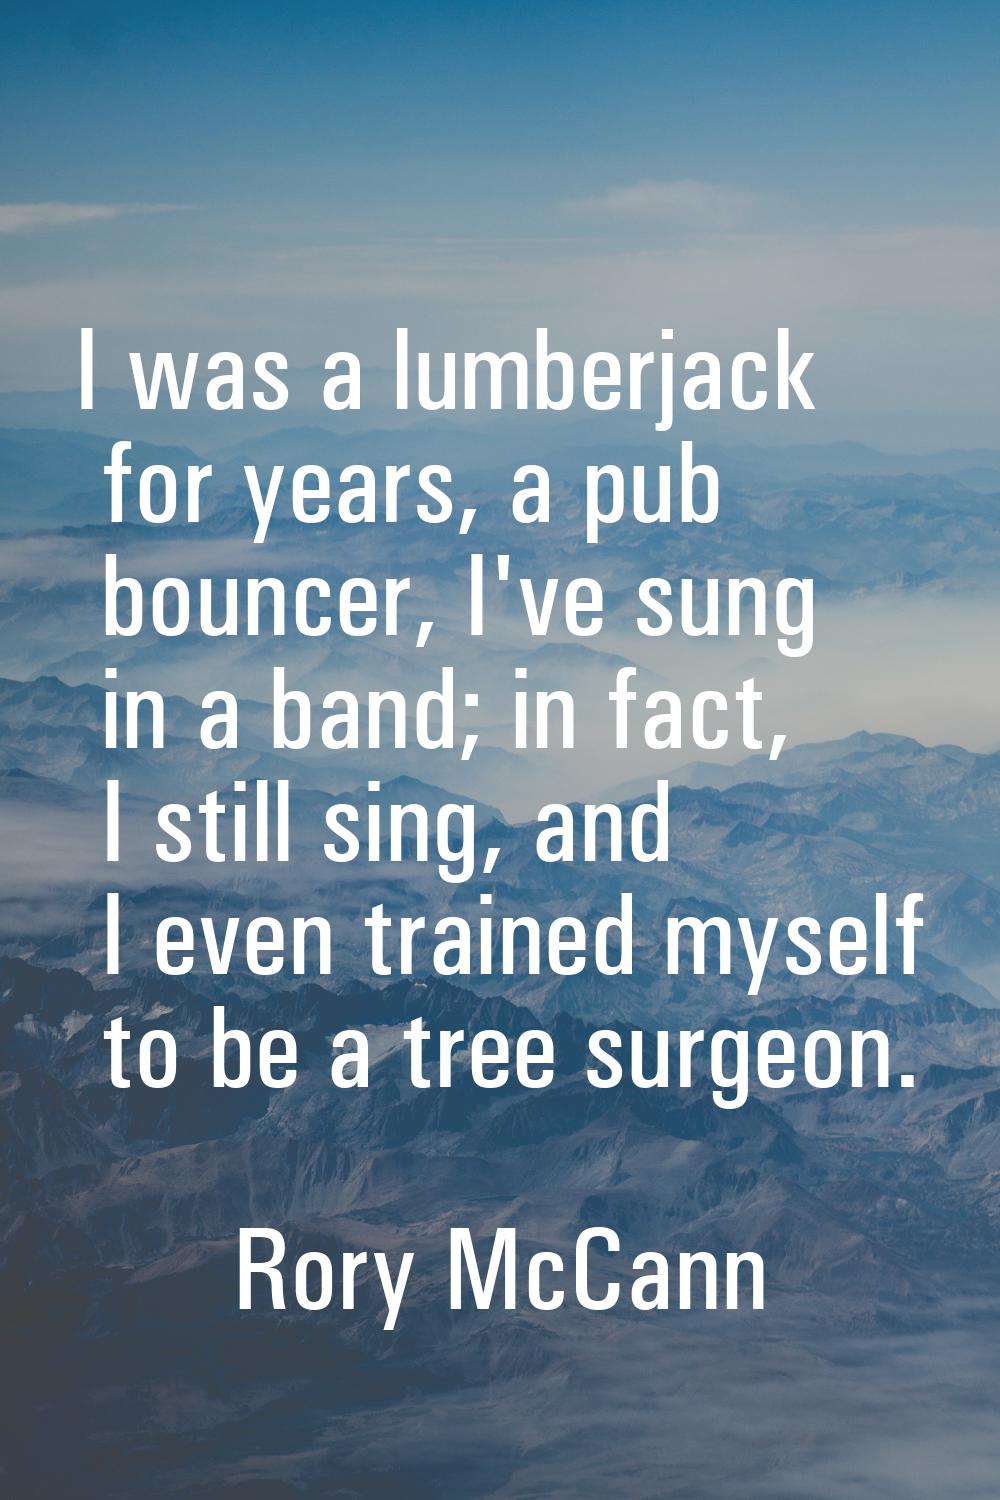 I was a lumberjack for years, a pub bouncer, I've sung in a band; in fact, I still sing, and I even